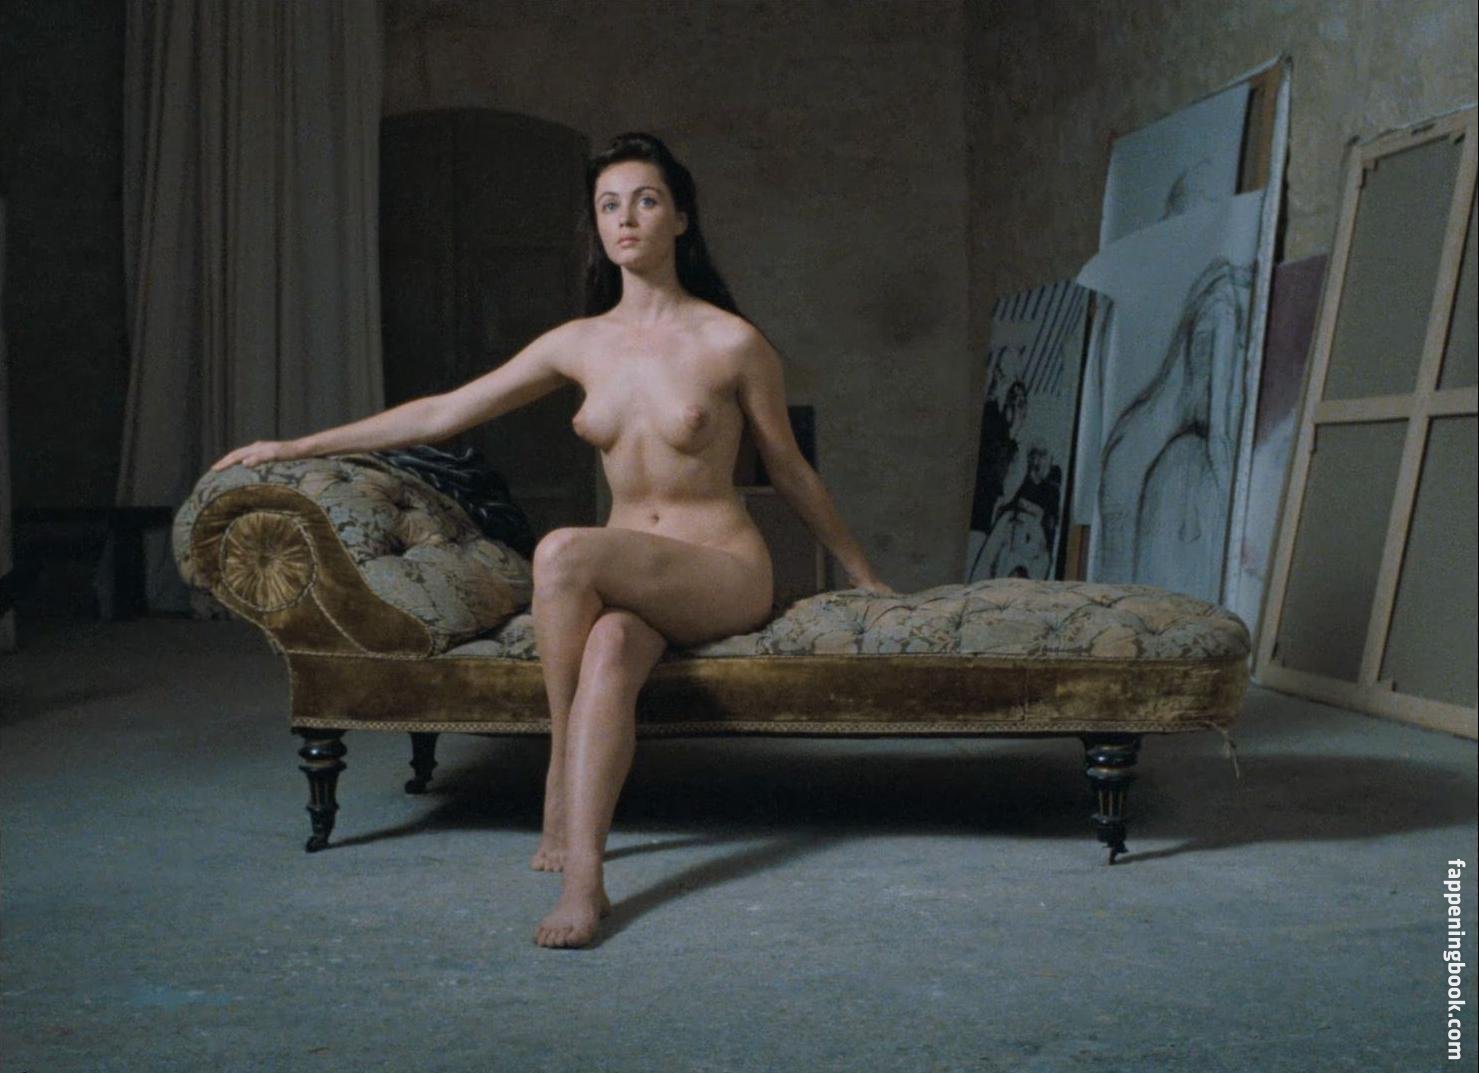 Emmanuelle Béart Nude, The Fappening - Photo #177884 - FappeningBook.